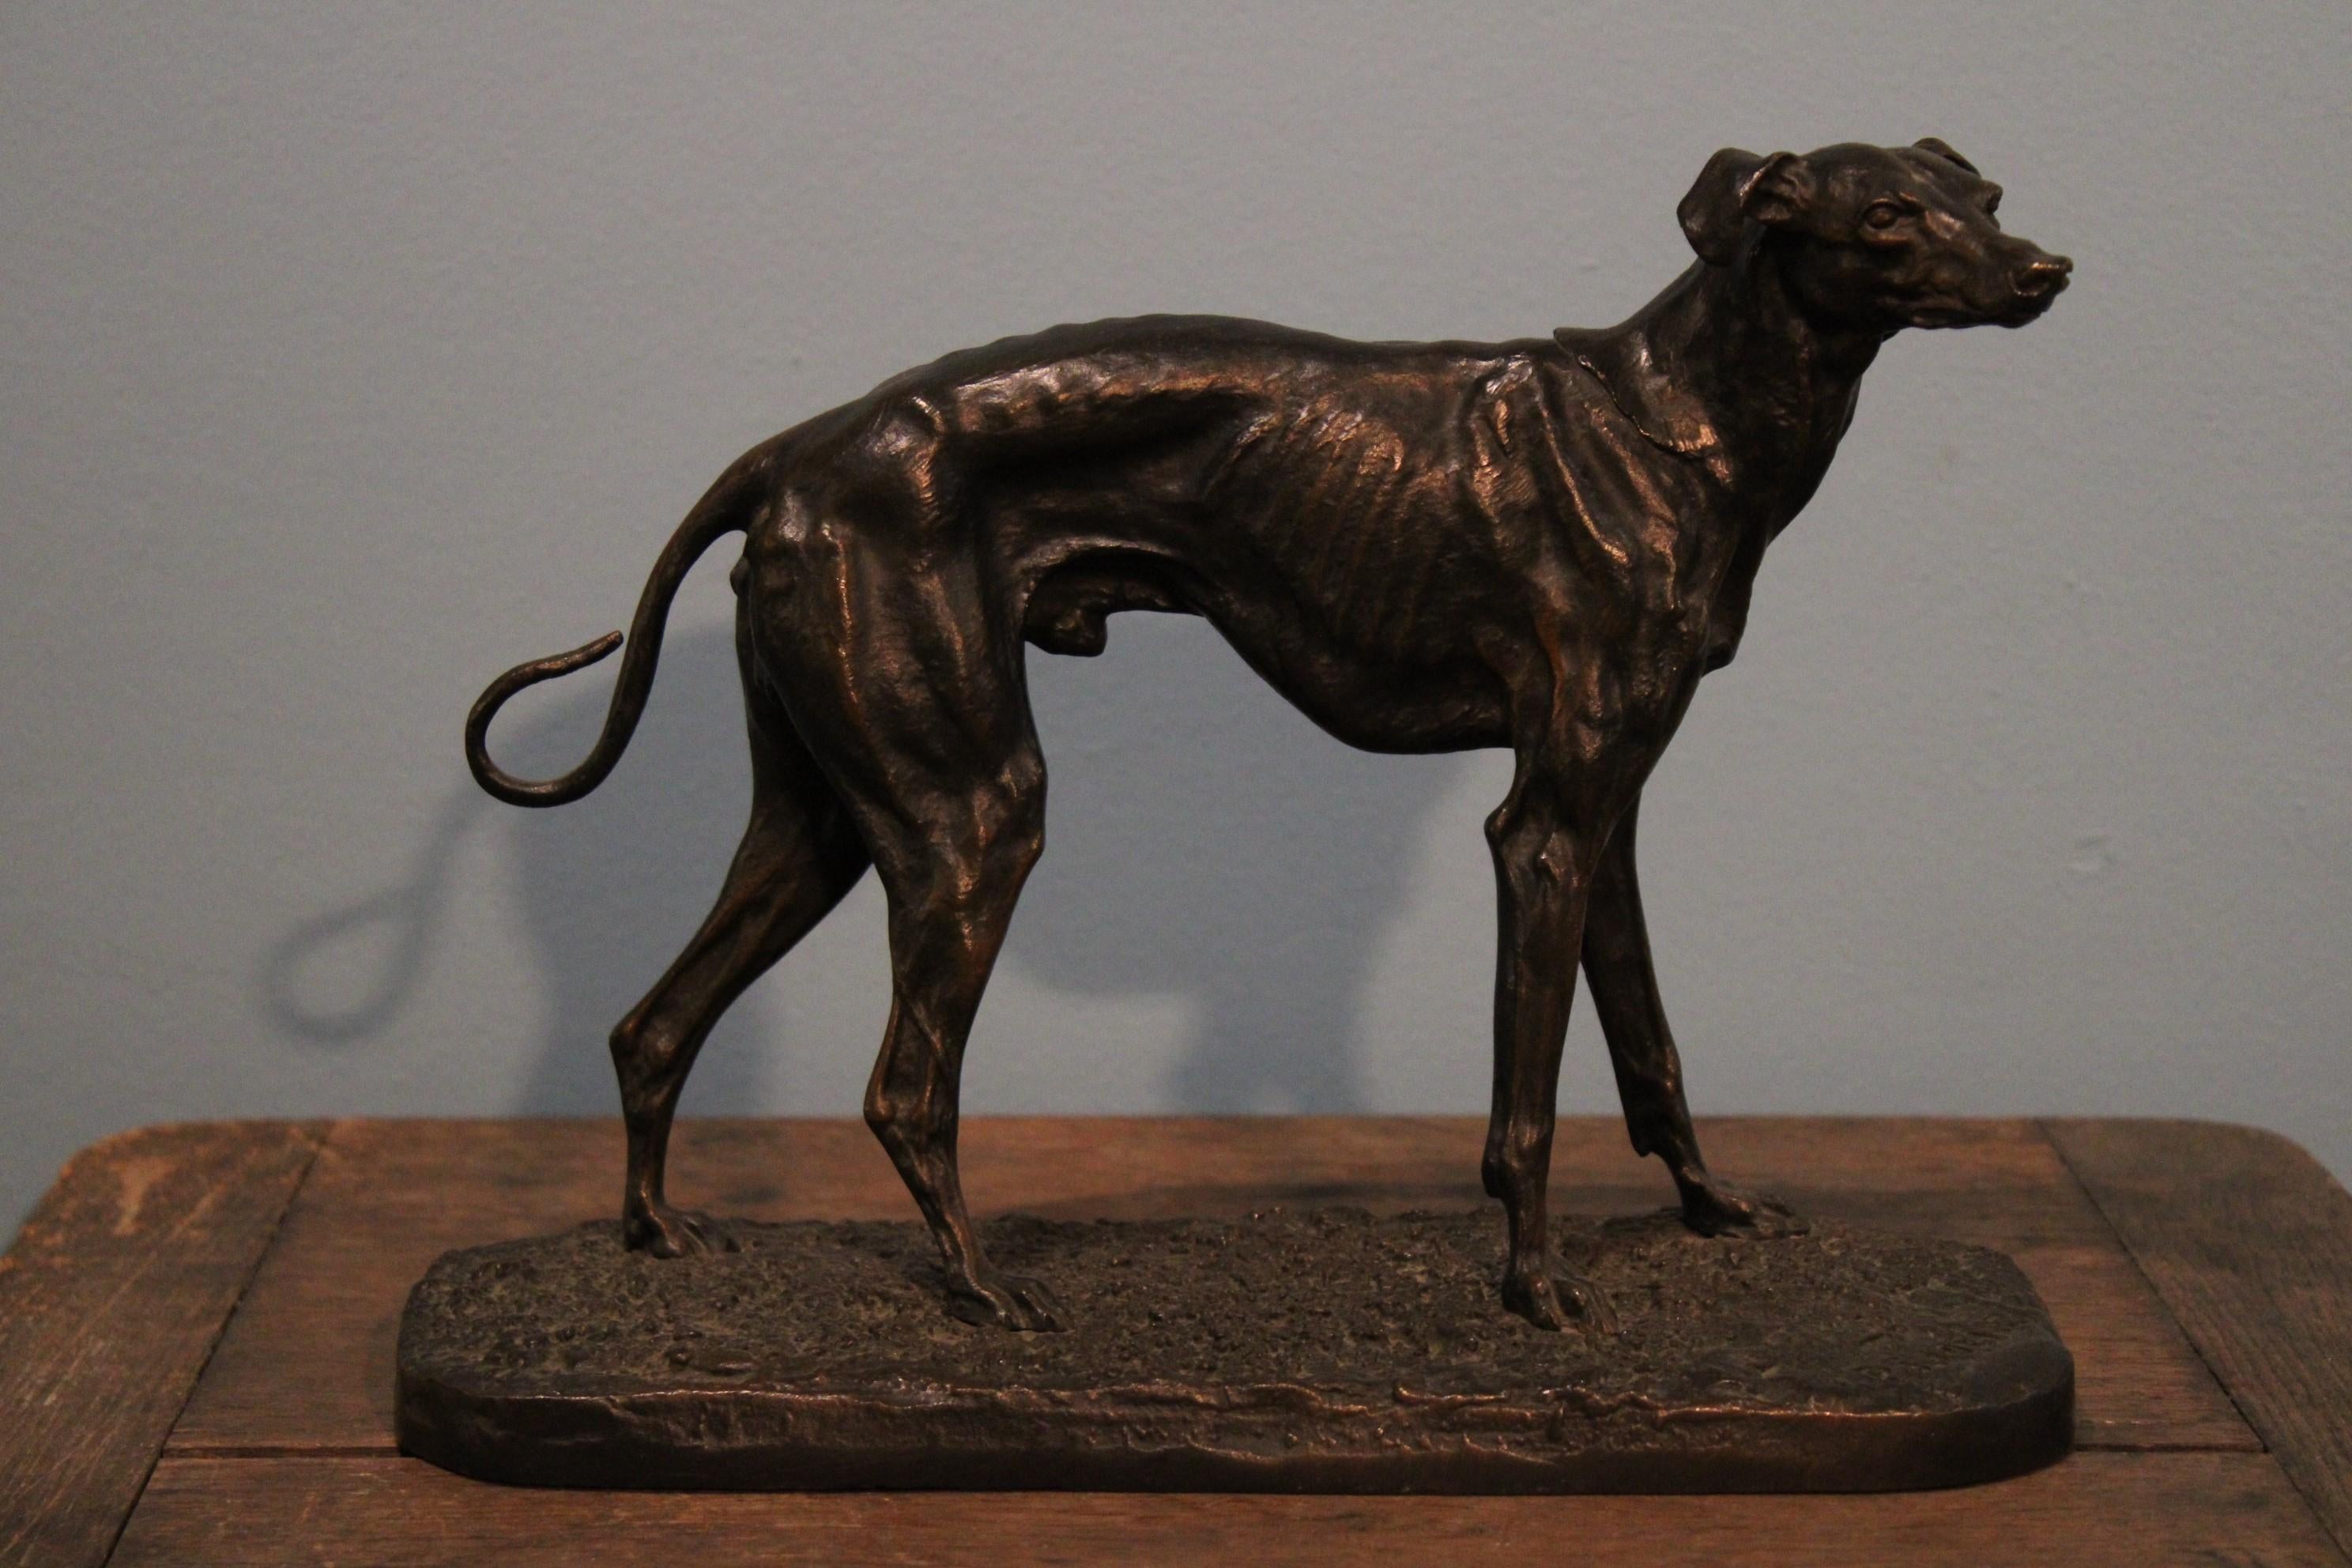 Bronze sculpture of a dog by the French artiste Pierre Jules Mène.
Brown patina.
Signature of the sculptor 